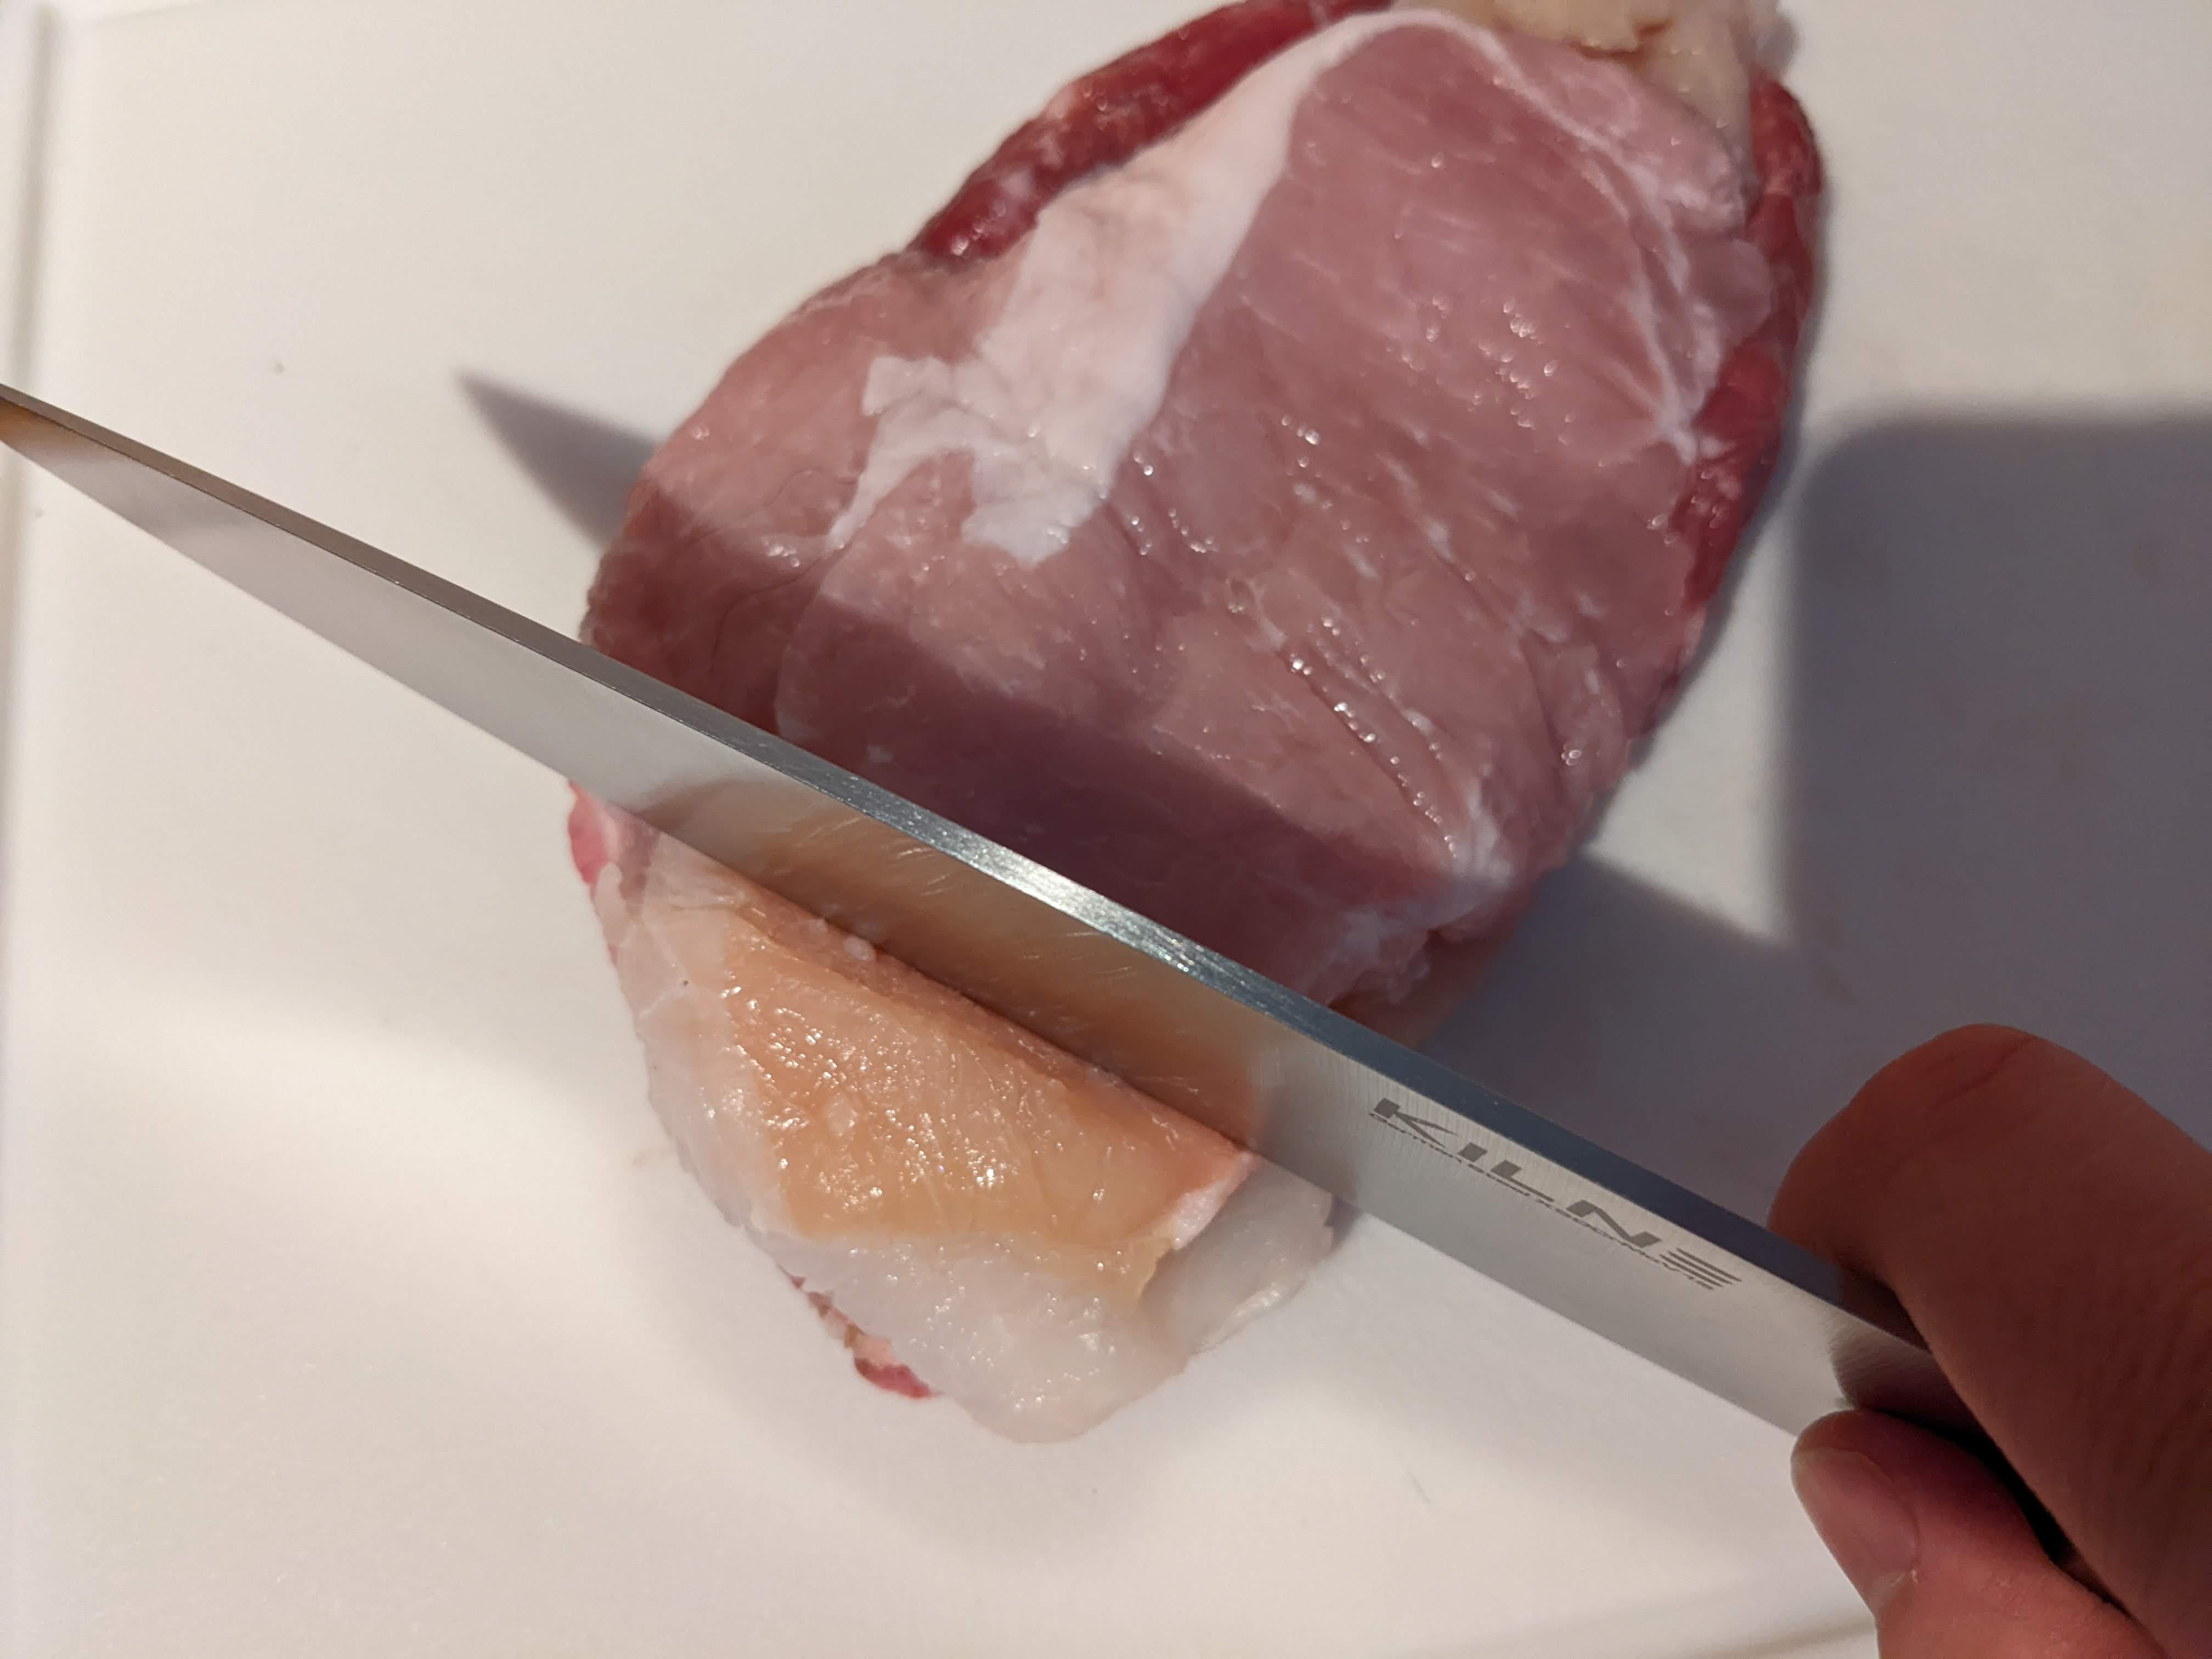 Surf and turfuckit: let's glue four types of meat together